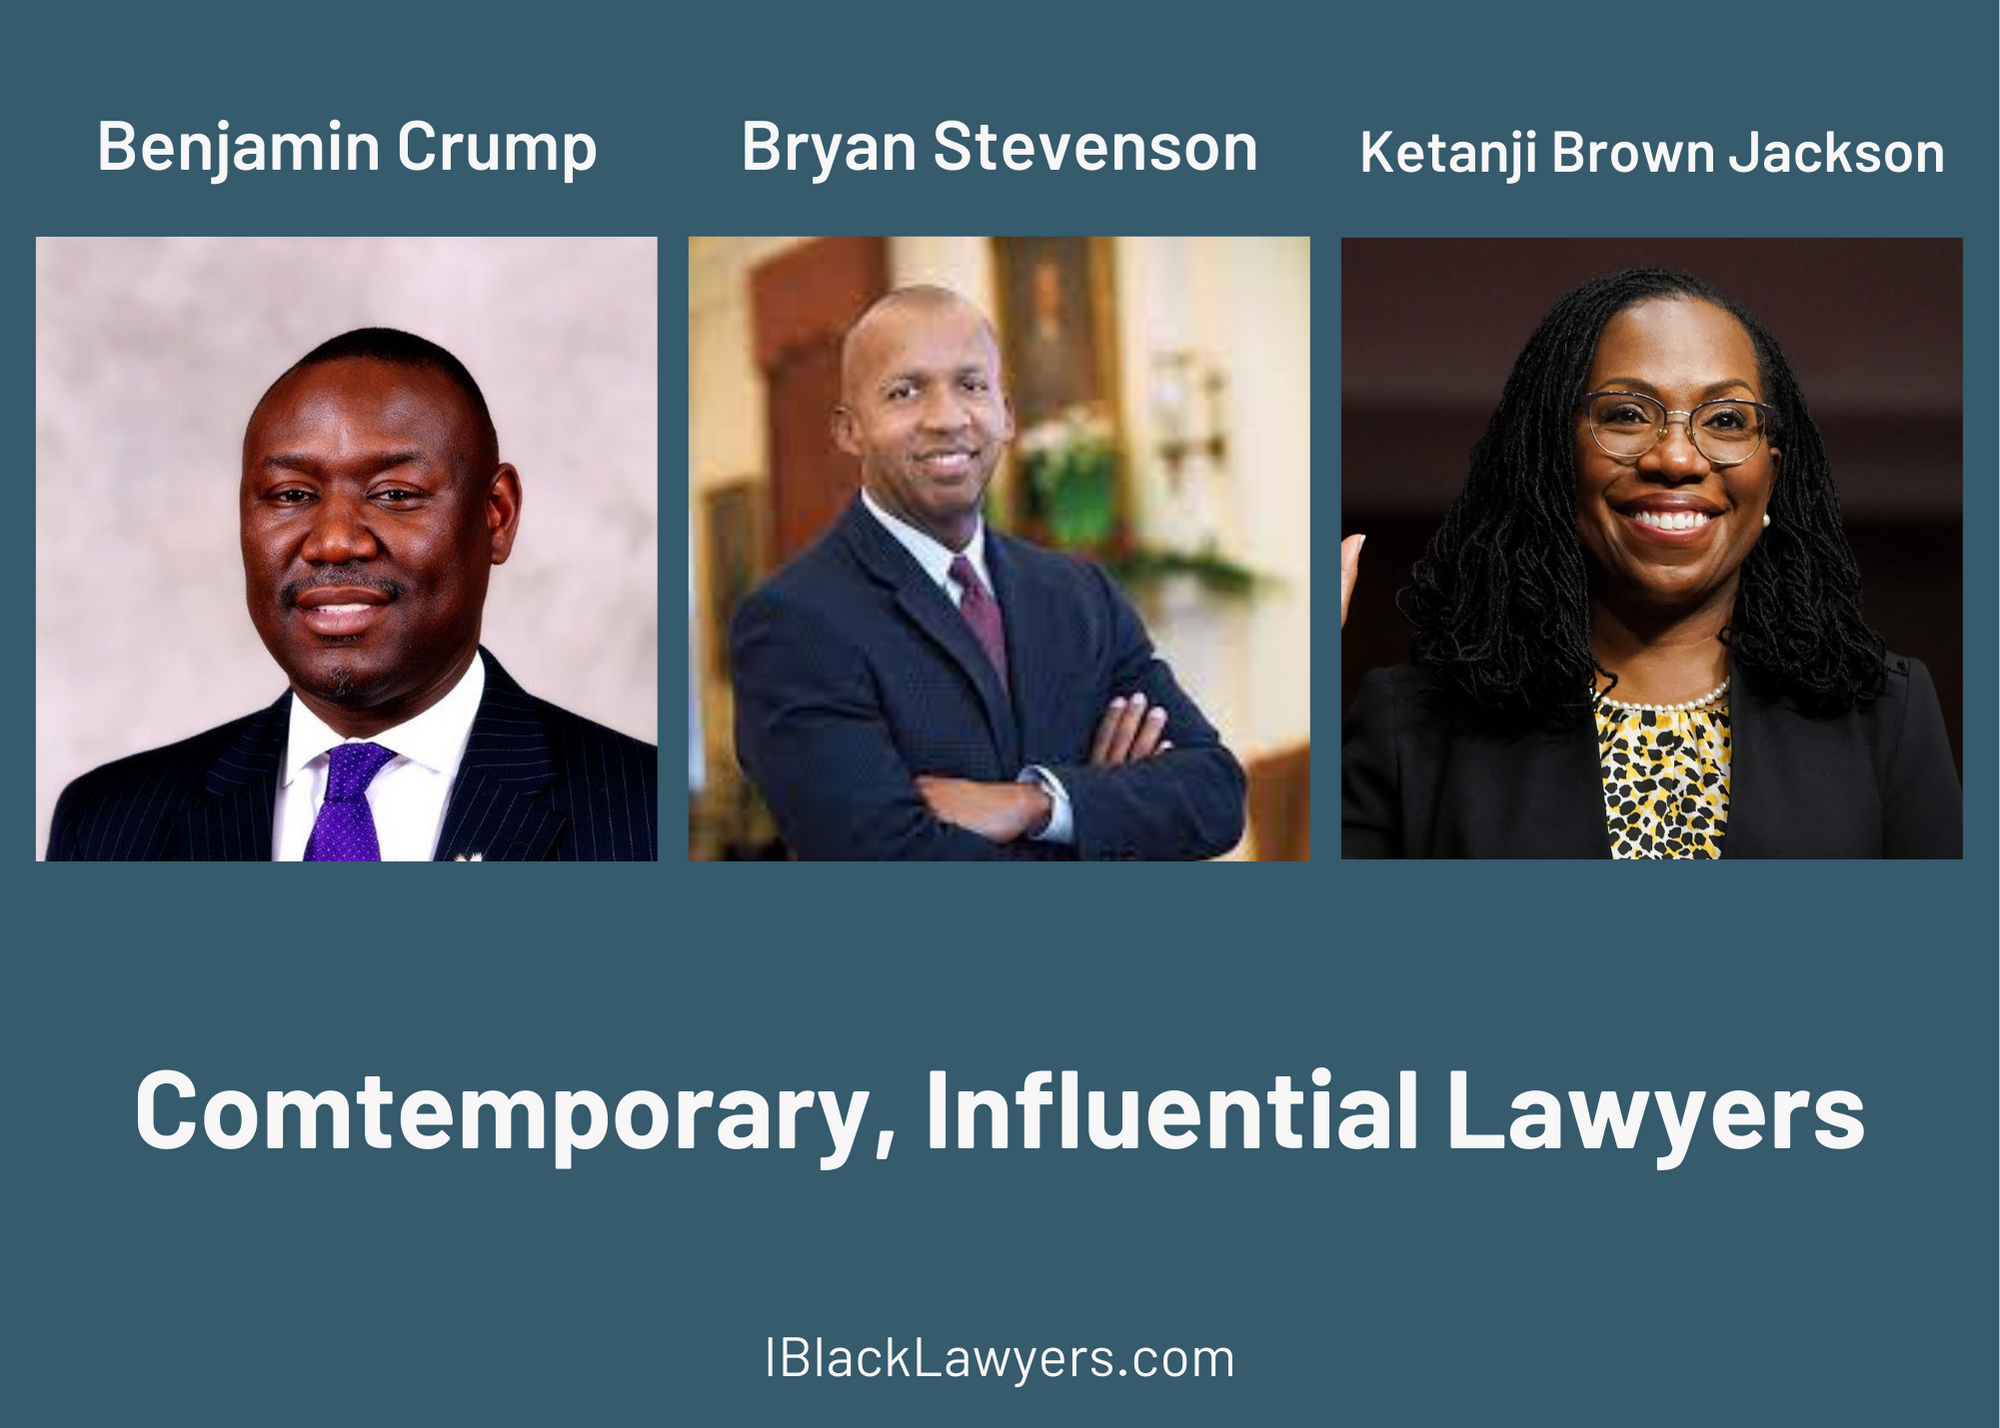 Why Do We Need More Black Lawyers Professional Website Blog Article By Admin User Blog Author